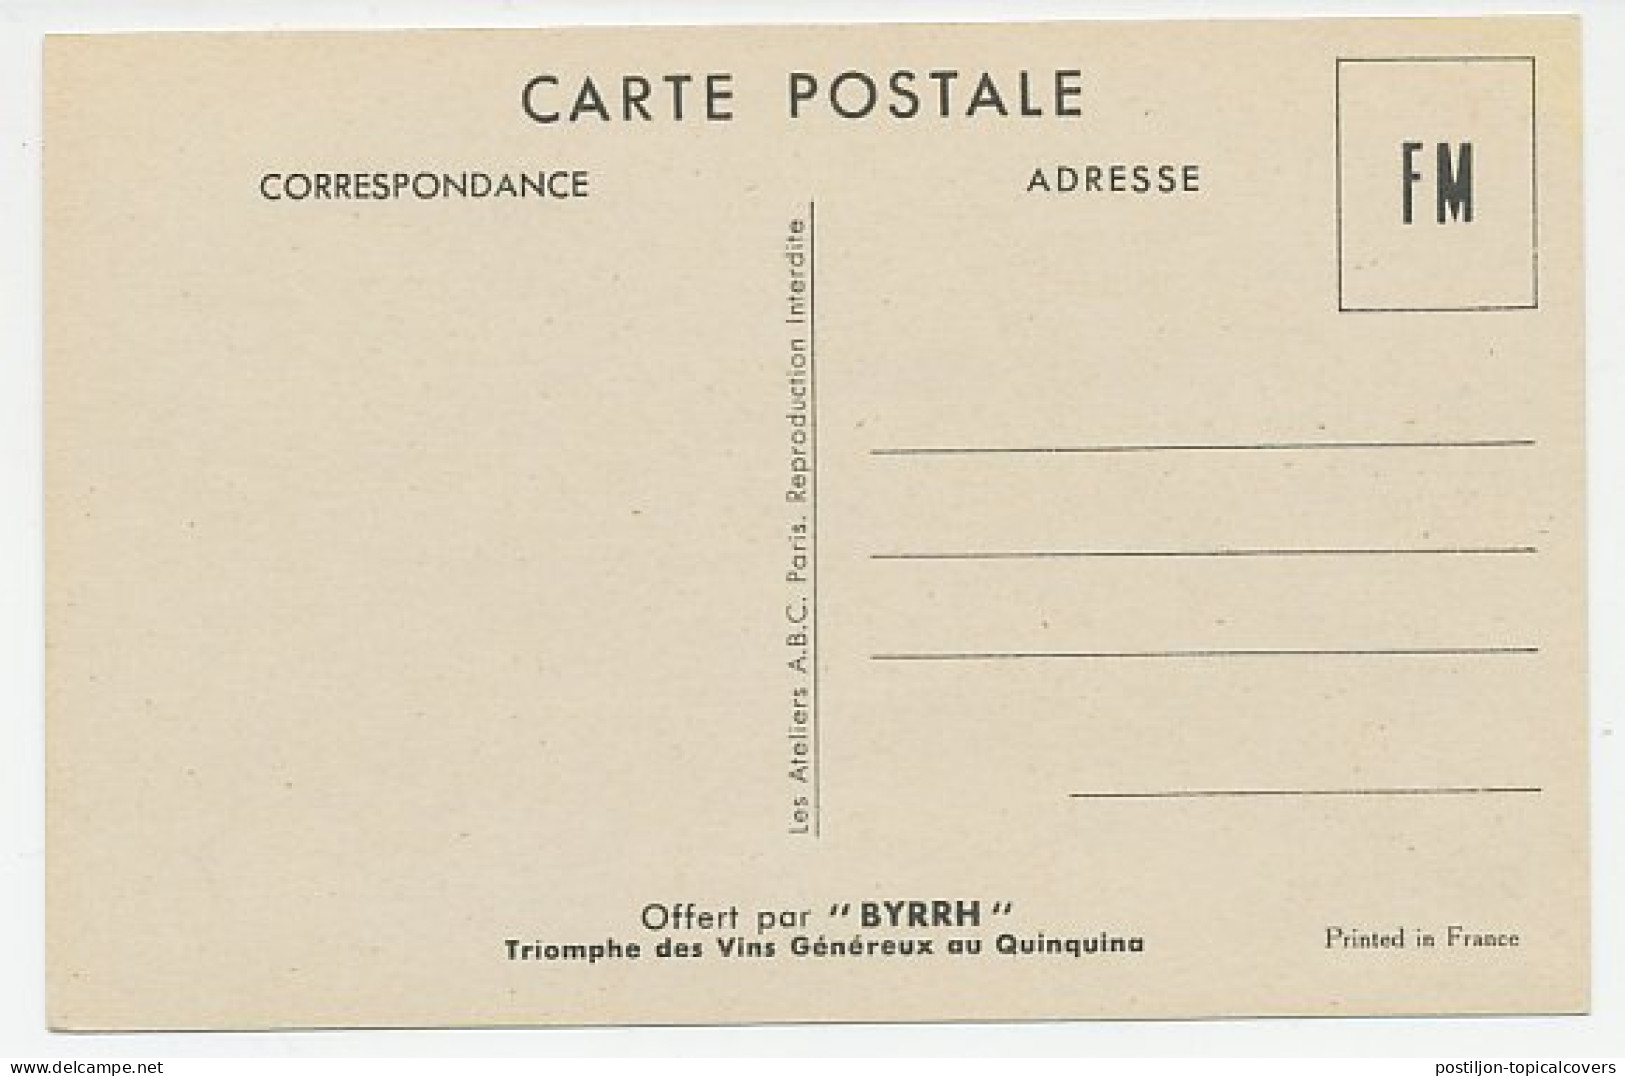 Military Service Card France Soldiers - WWII - WW2 (II Guerra Mundial)